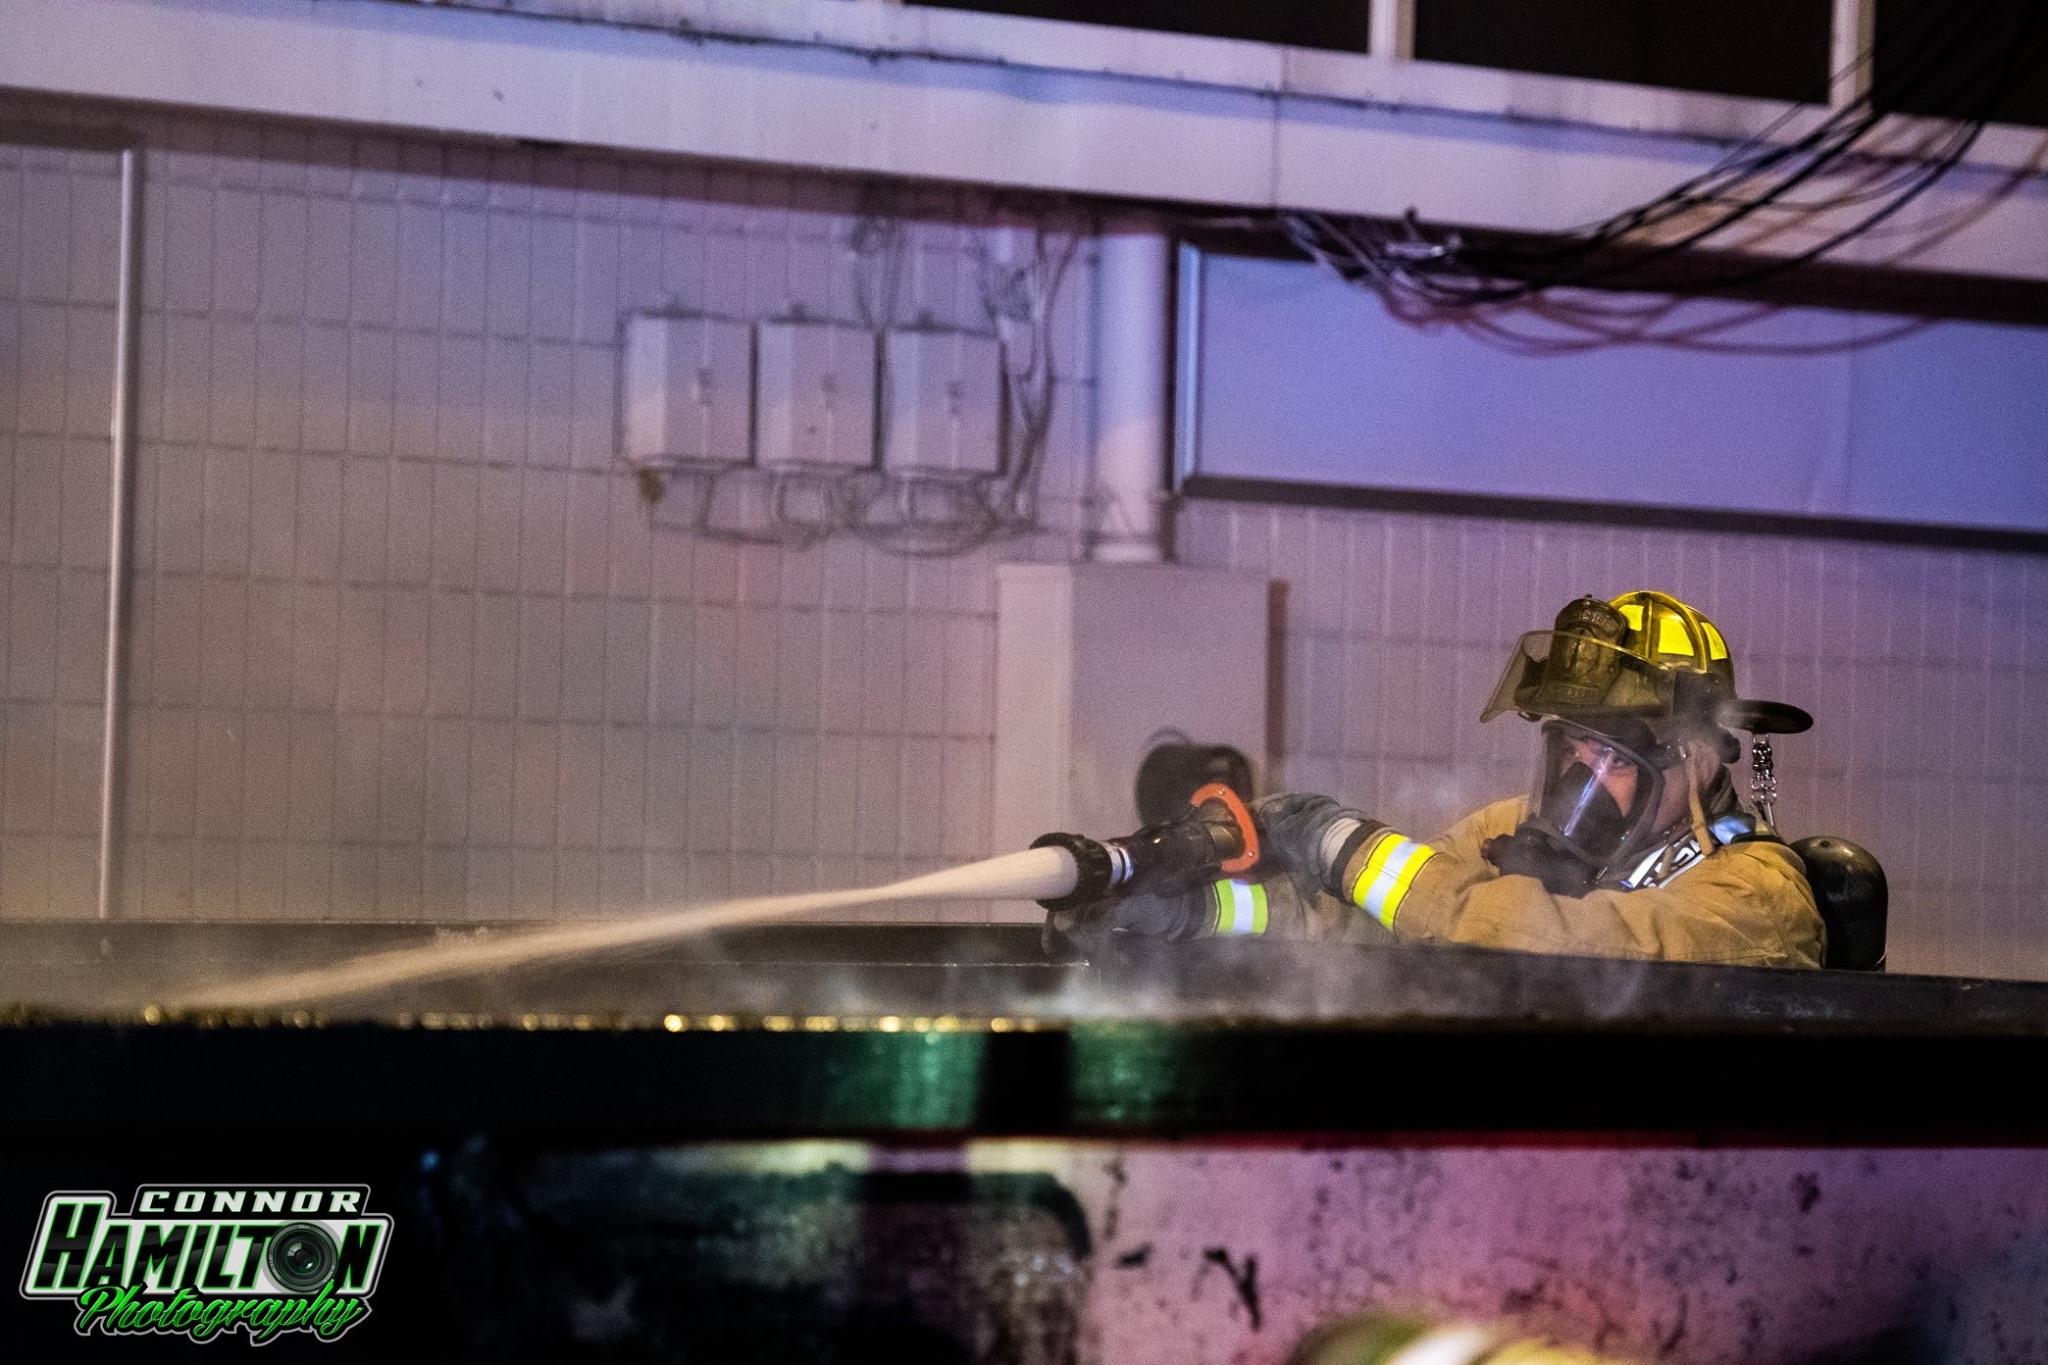  On 05/26/2019, East Side Fire responded for a dumpster fire. The fire was quickly knocked down preventing the fire from spreading to the nearby structure. 